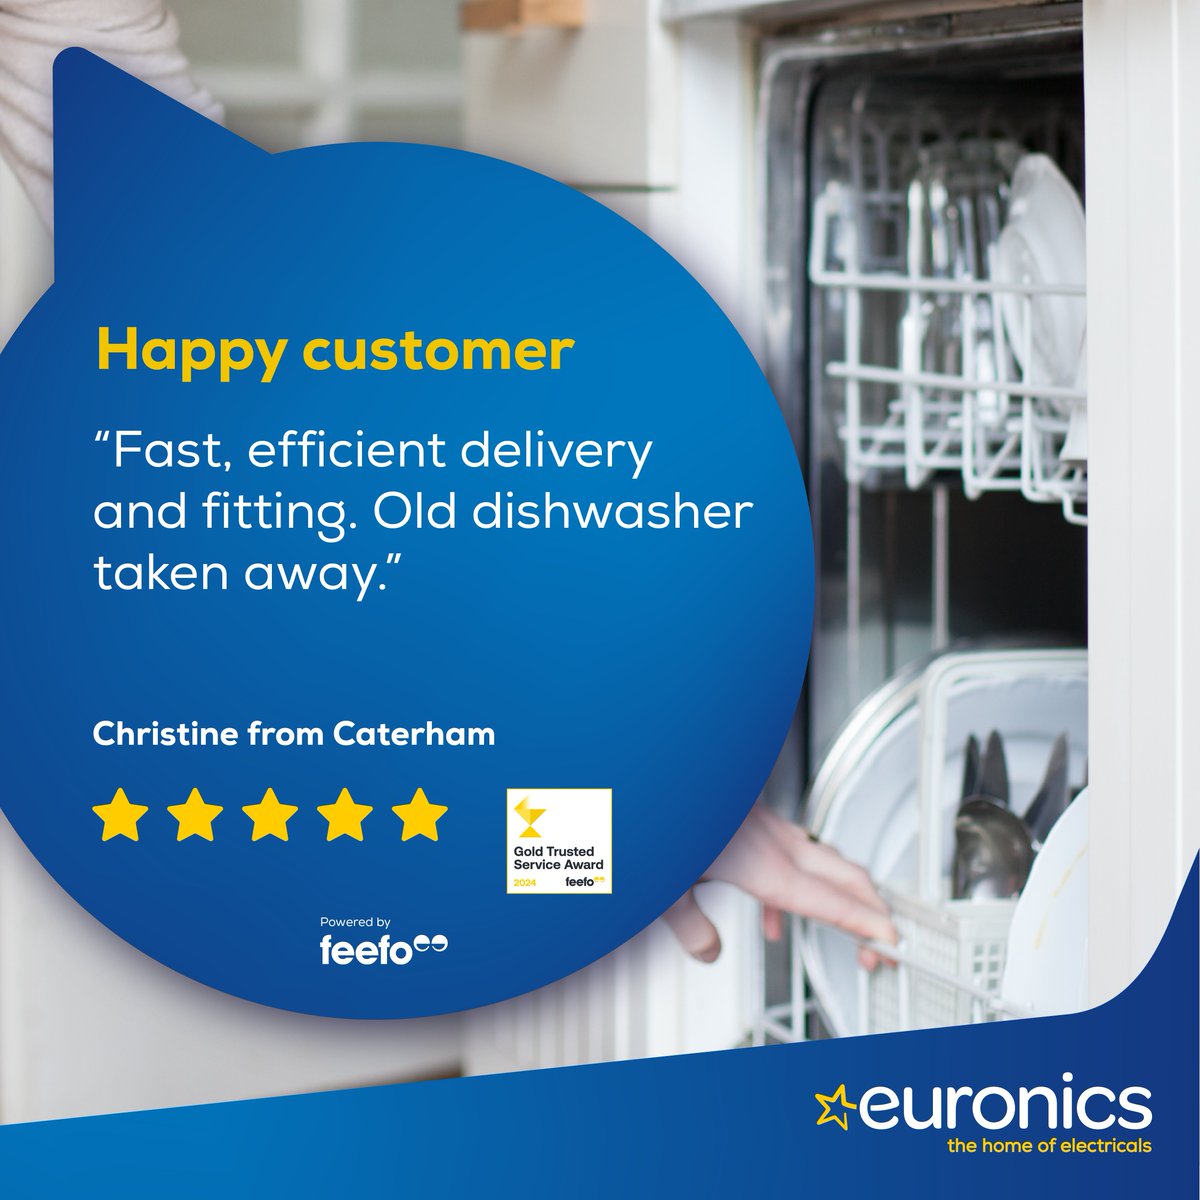 If you're looking for a dishwasher, washing machine, or something else, why not give us a try? Shortlisted by @whichuk for Customer Service Brand of the Year, you won't regret it. Shop locally, online today > euronics.la/m/Euronics #TheHomeofElectricals #CustomerSatisfaction